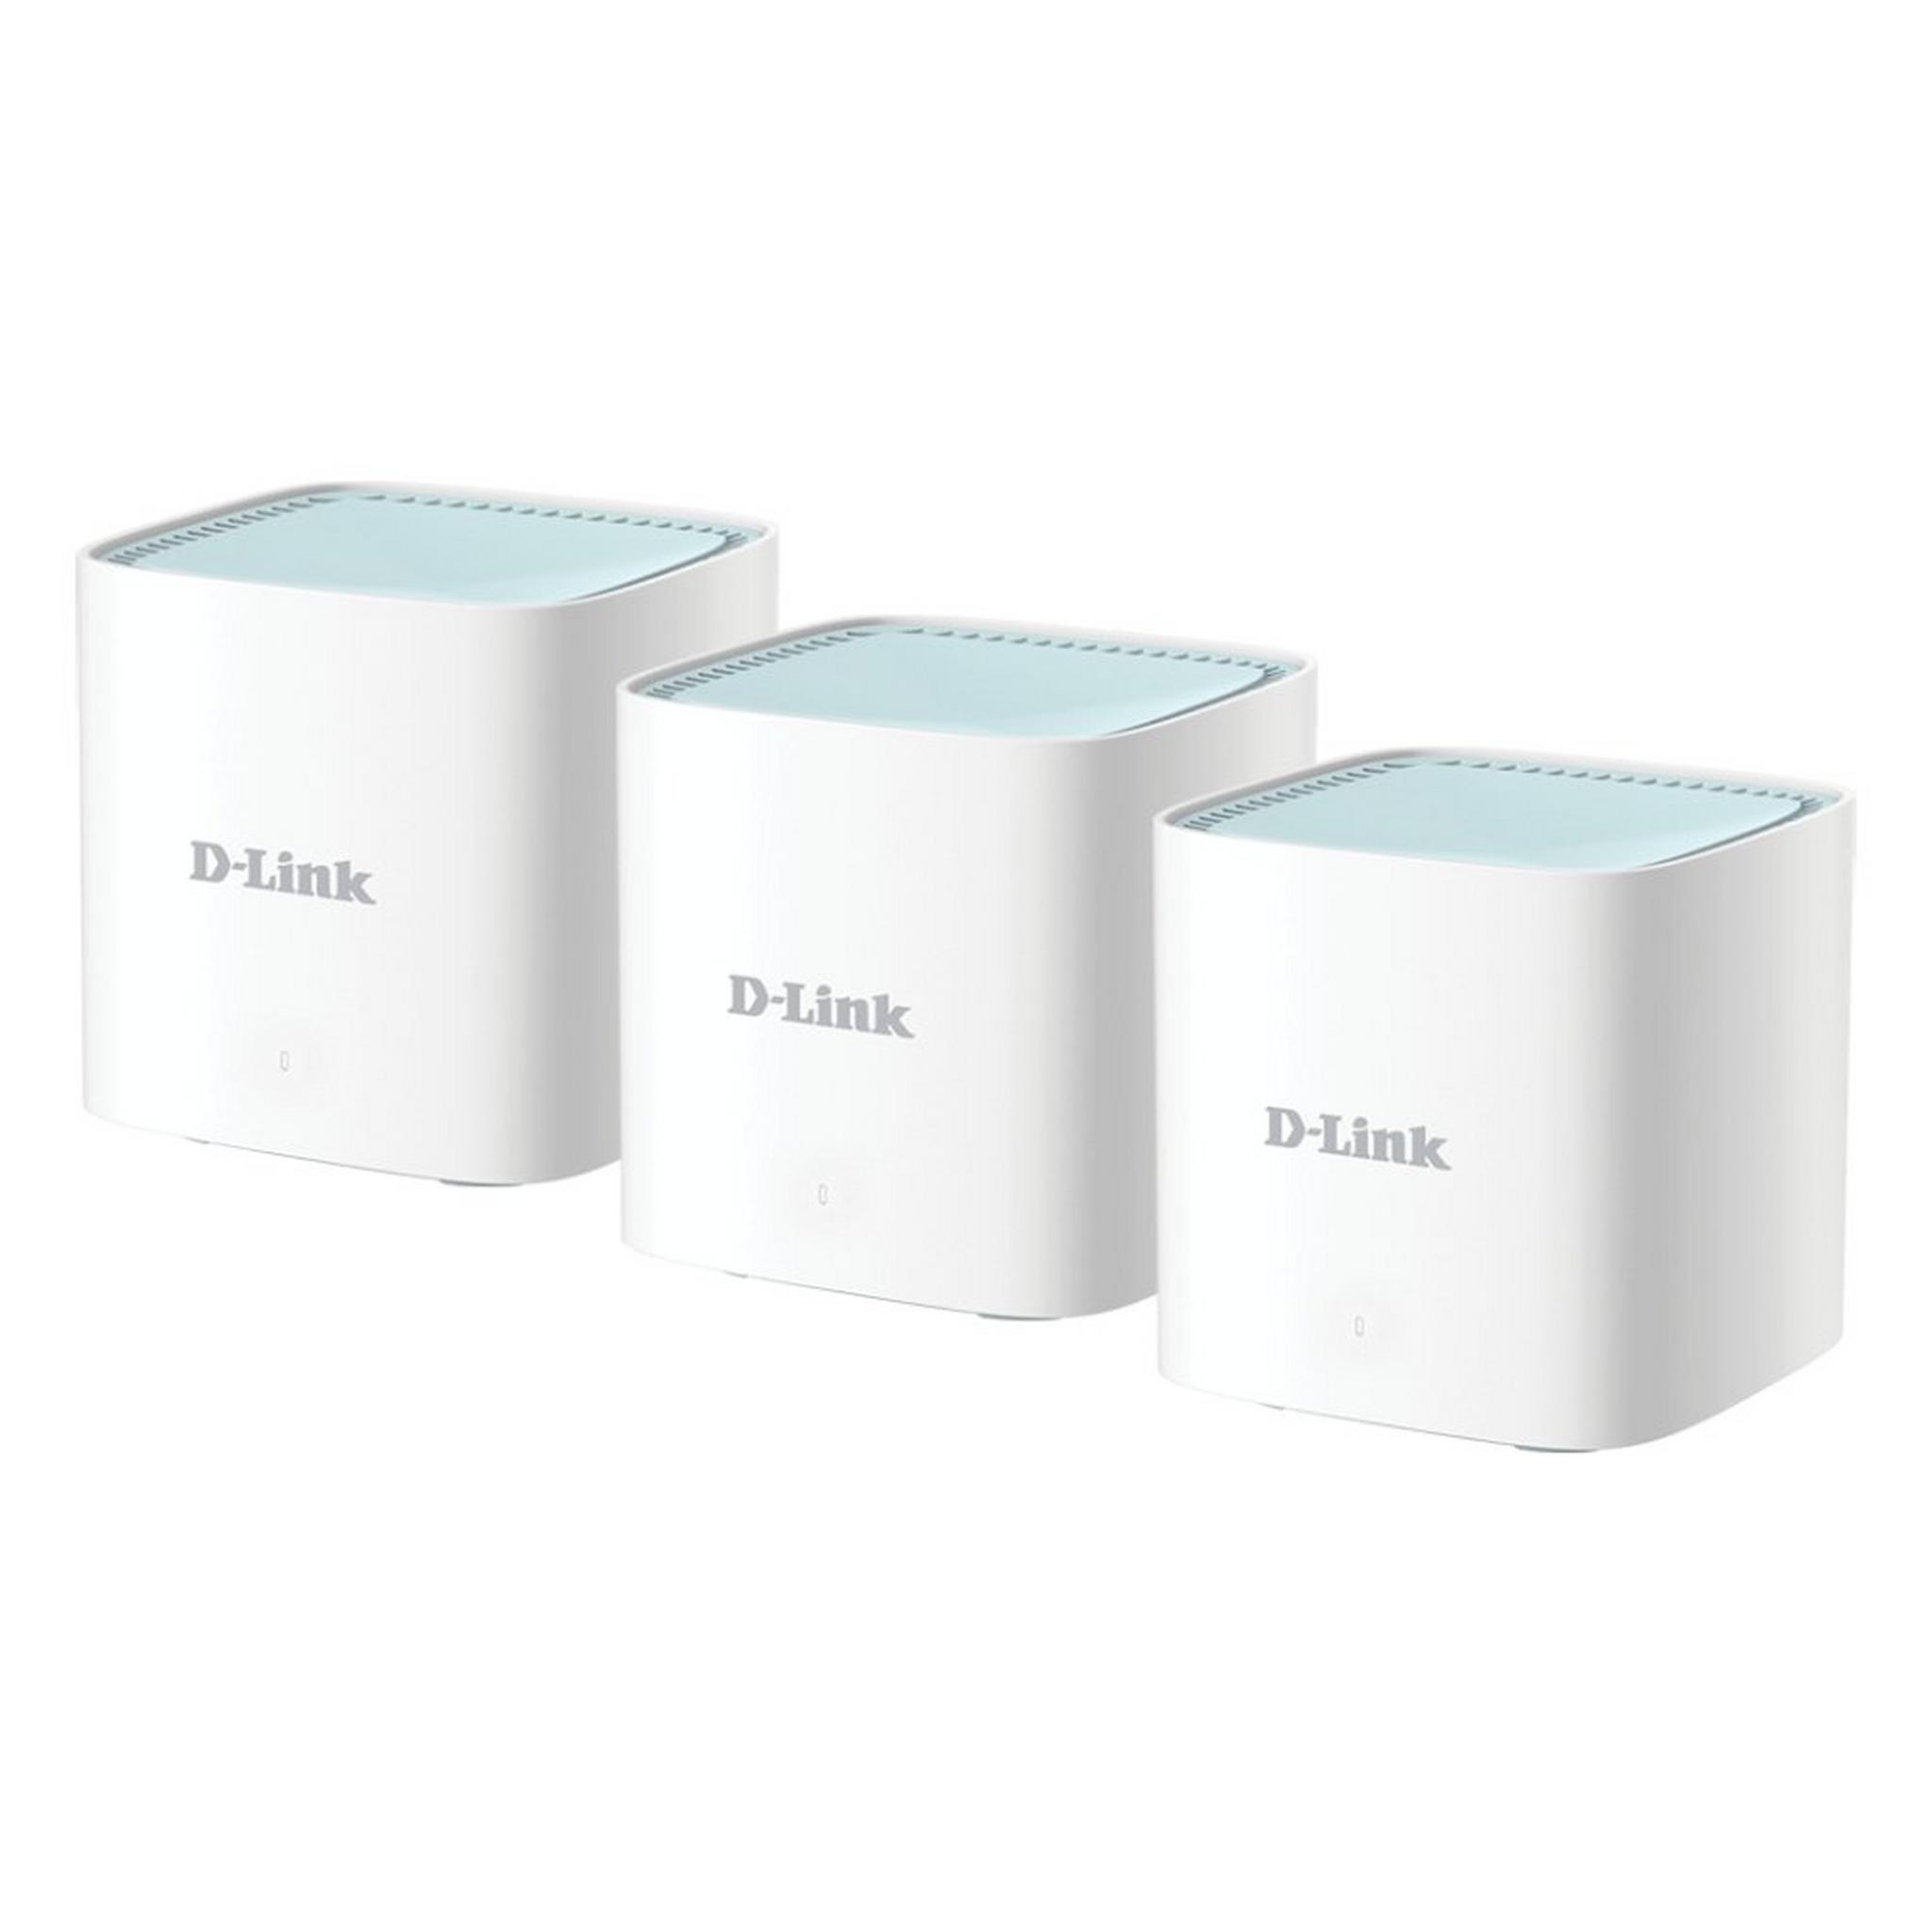 DLink M15-AX1500 Wi-Fi 6 Mesh Router - 3 Packs